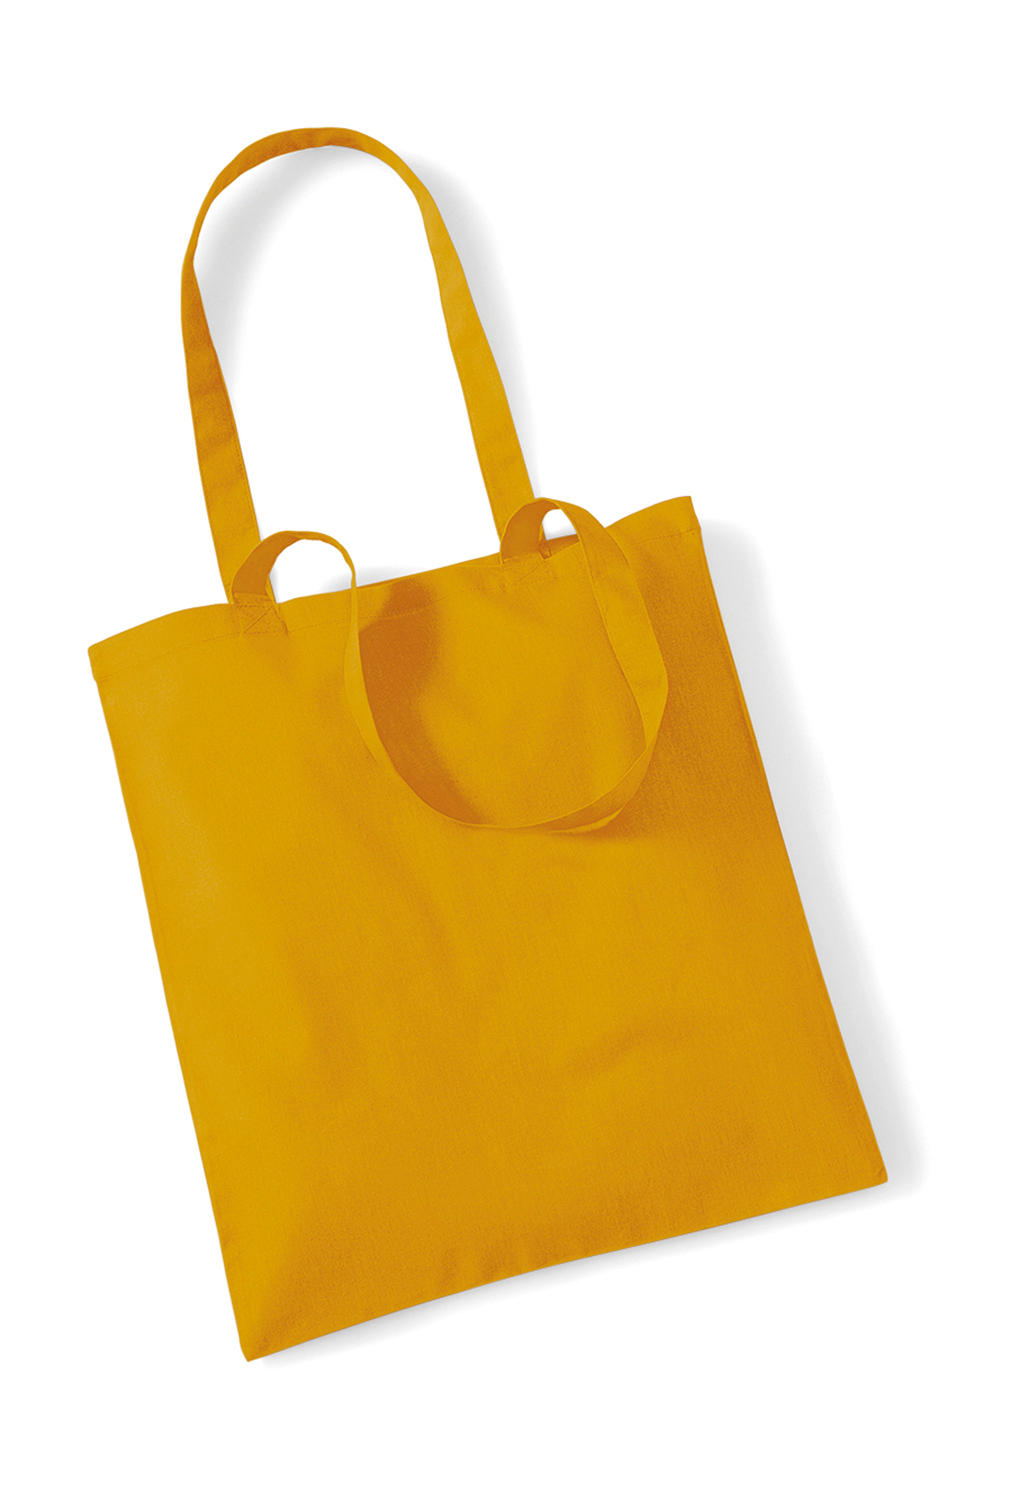  Bag for Life - Long Handles in Farbe Mustard